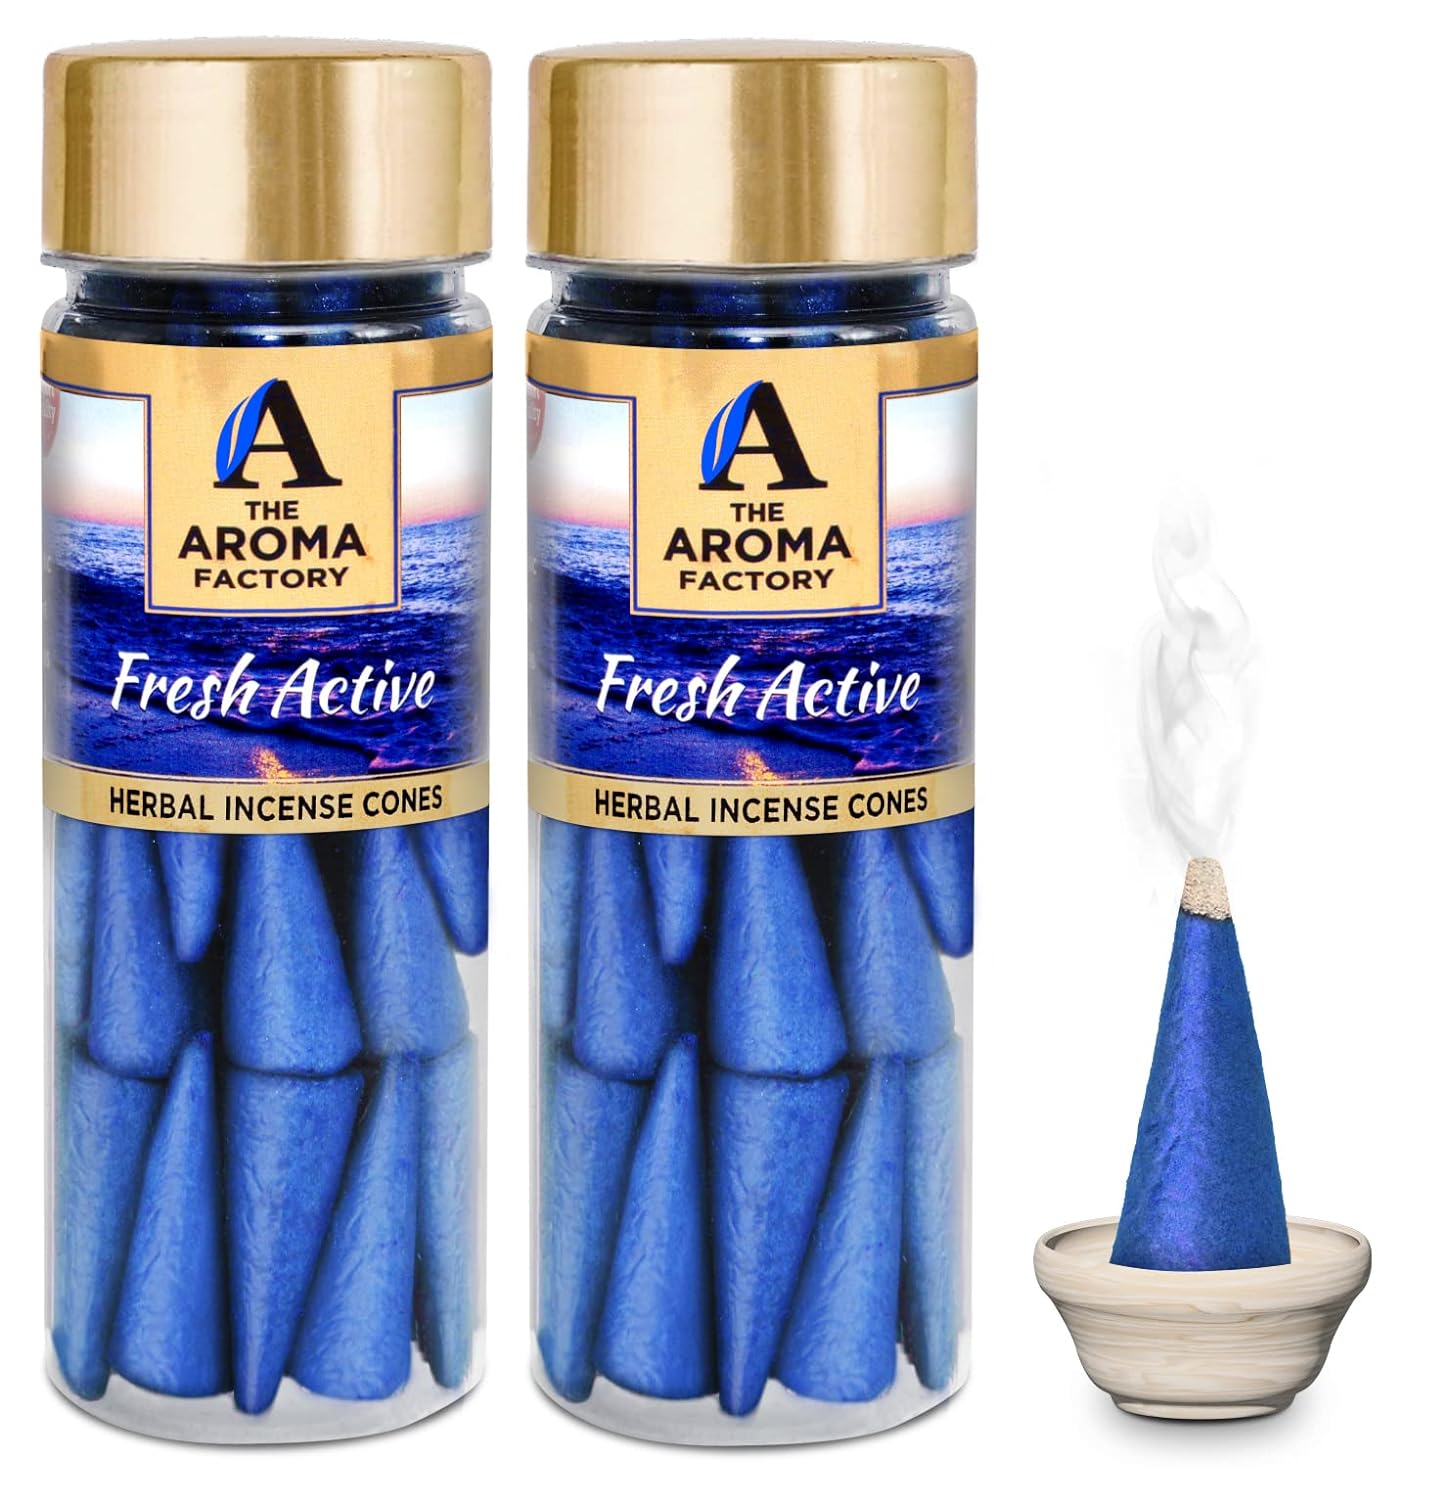 The Aroma Factory Incense Dhoop Cone for Pooja, Fresh Active (100% Herbal & 0% Charcoal) 2 Bottles x 30 Cones